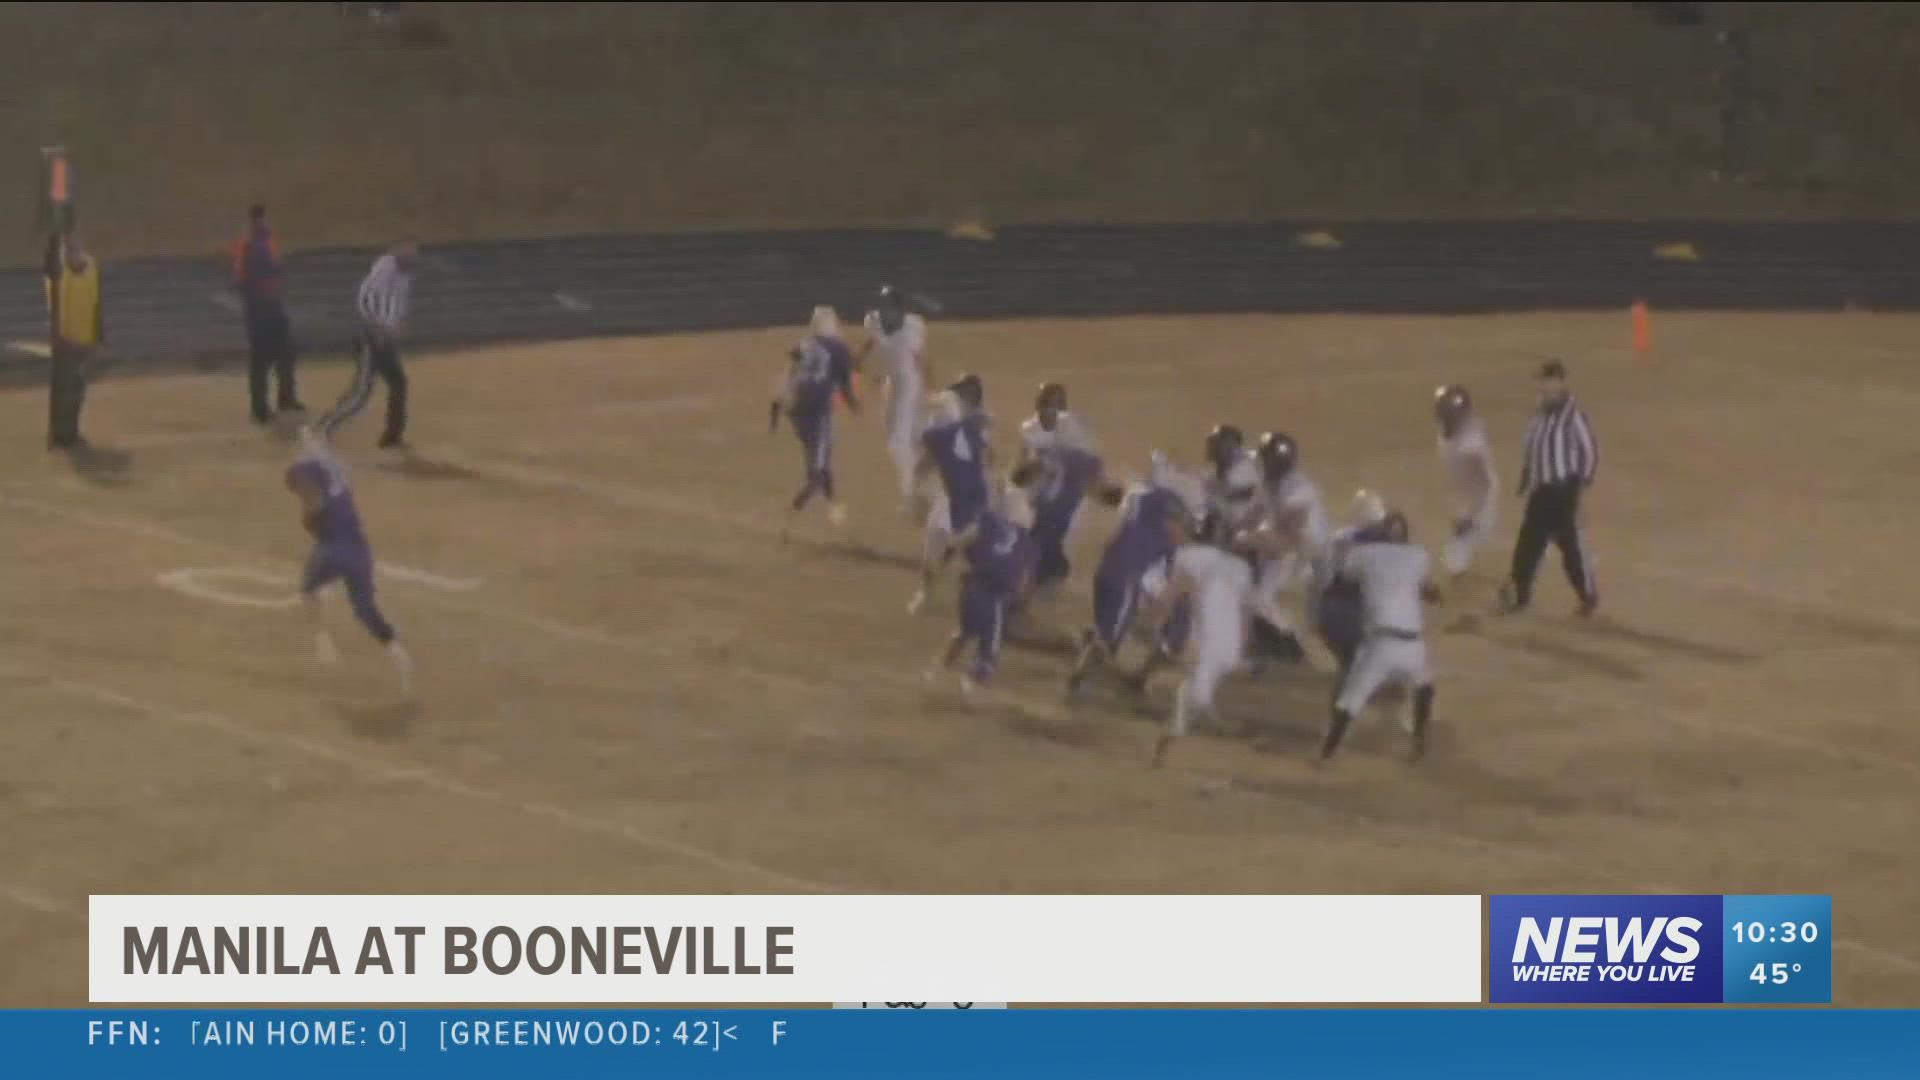 Booneville gets a decisive win over Manila in the playoffs.